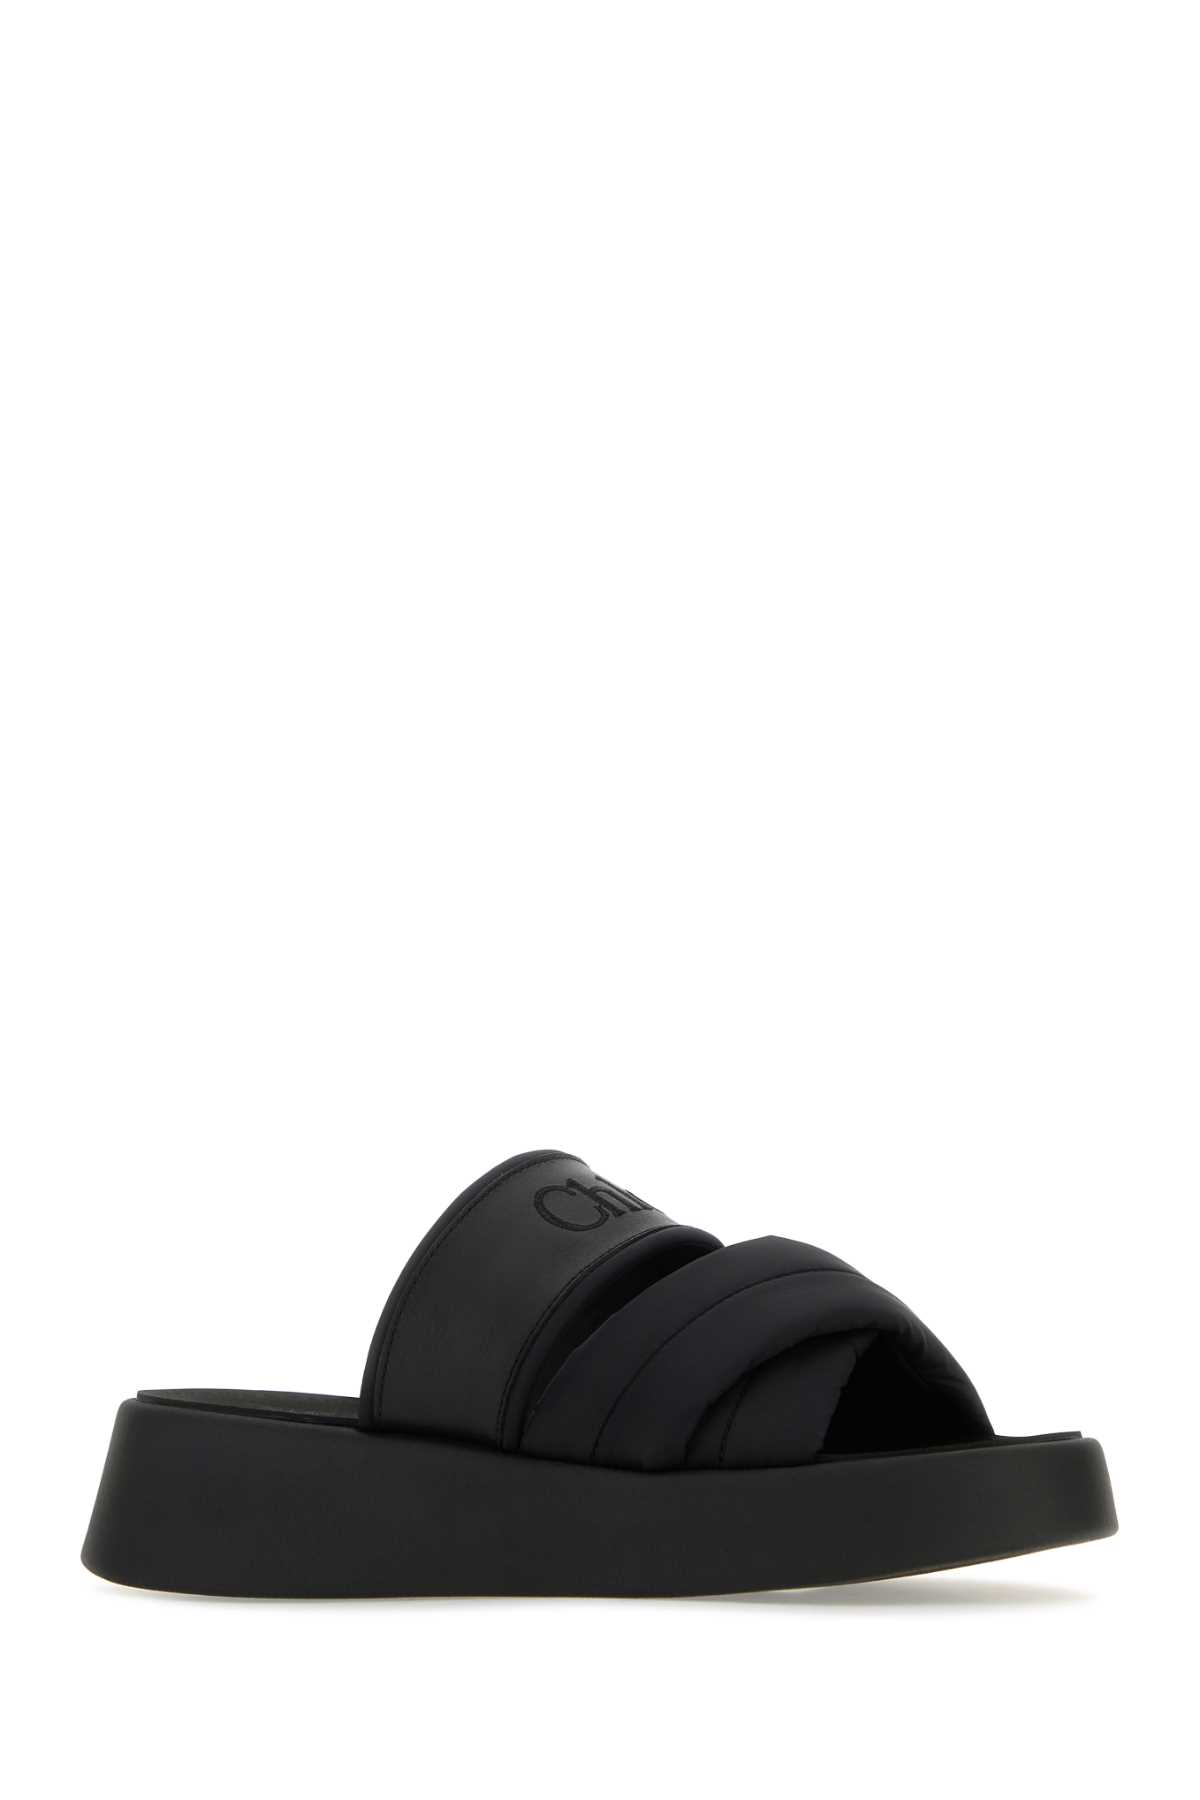 CHLOÉ BLACK FABRIC AND LEATHER MILA SLIPPERS